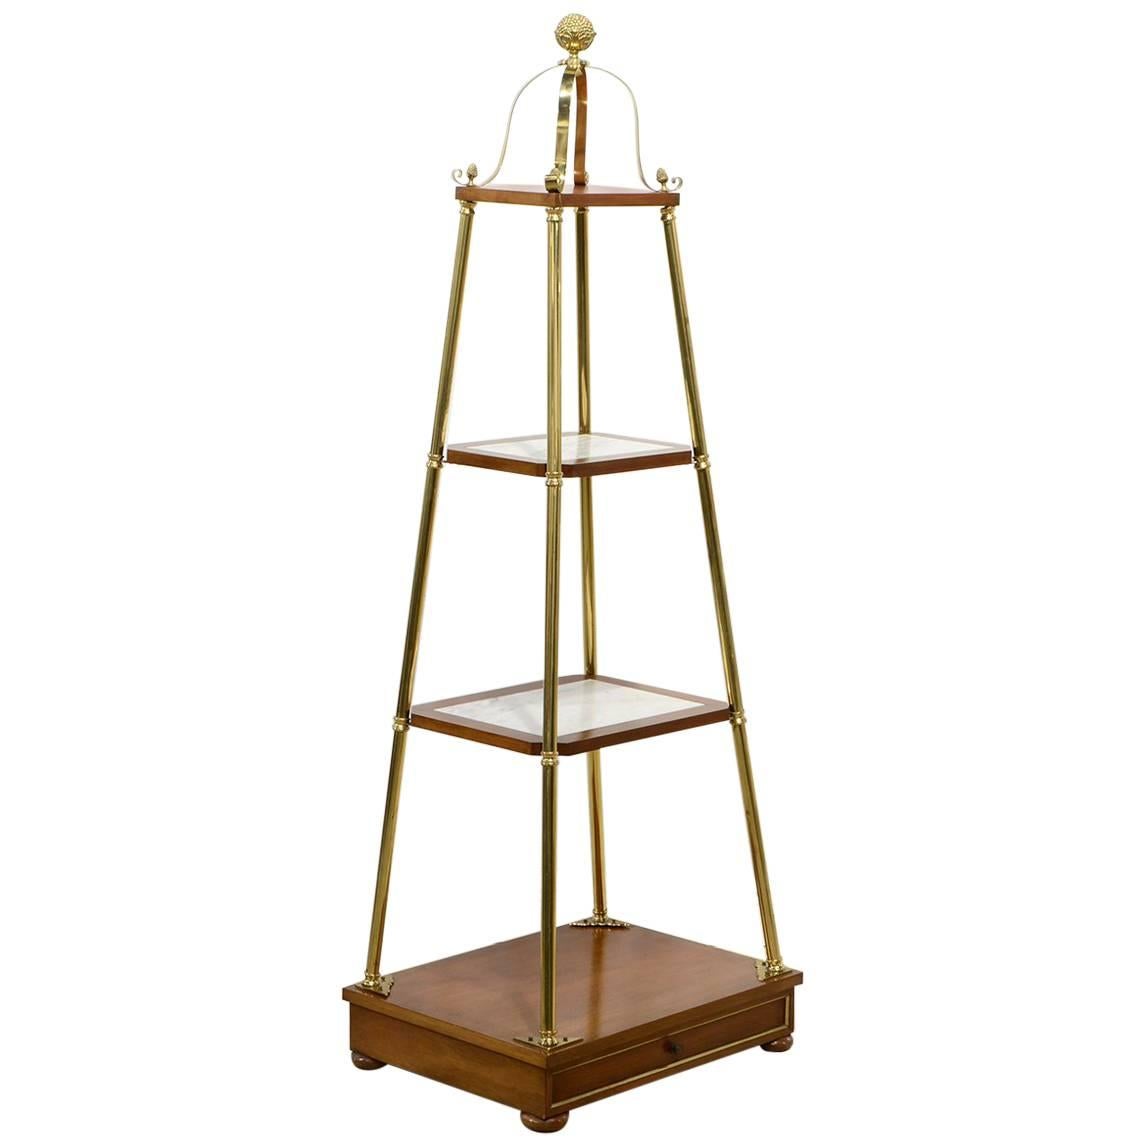 Unique Midcentury Obelisk Shape Brass, Mahogany and Marble Display Etagere